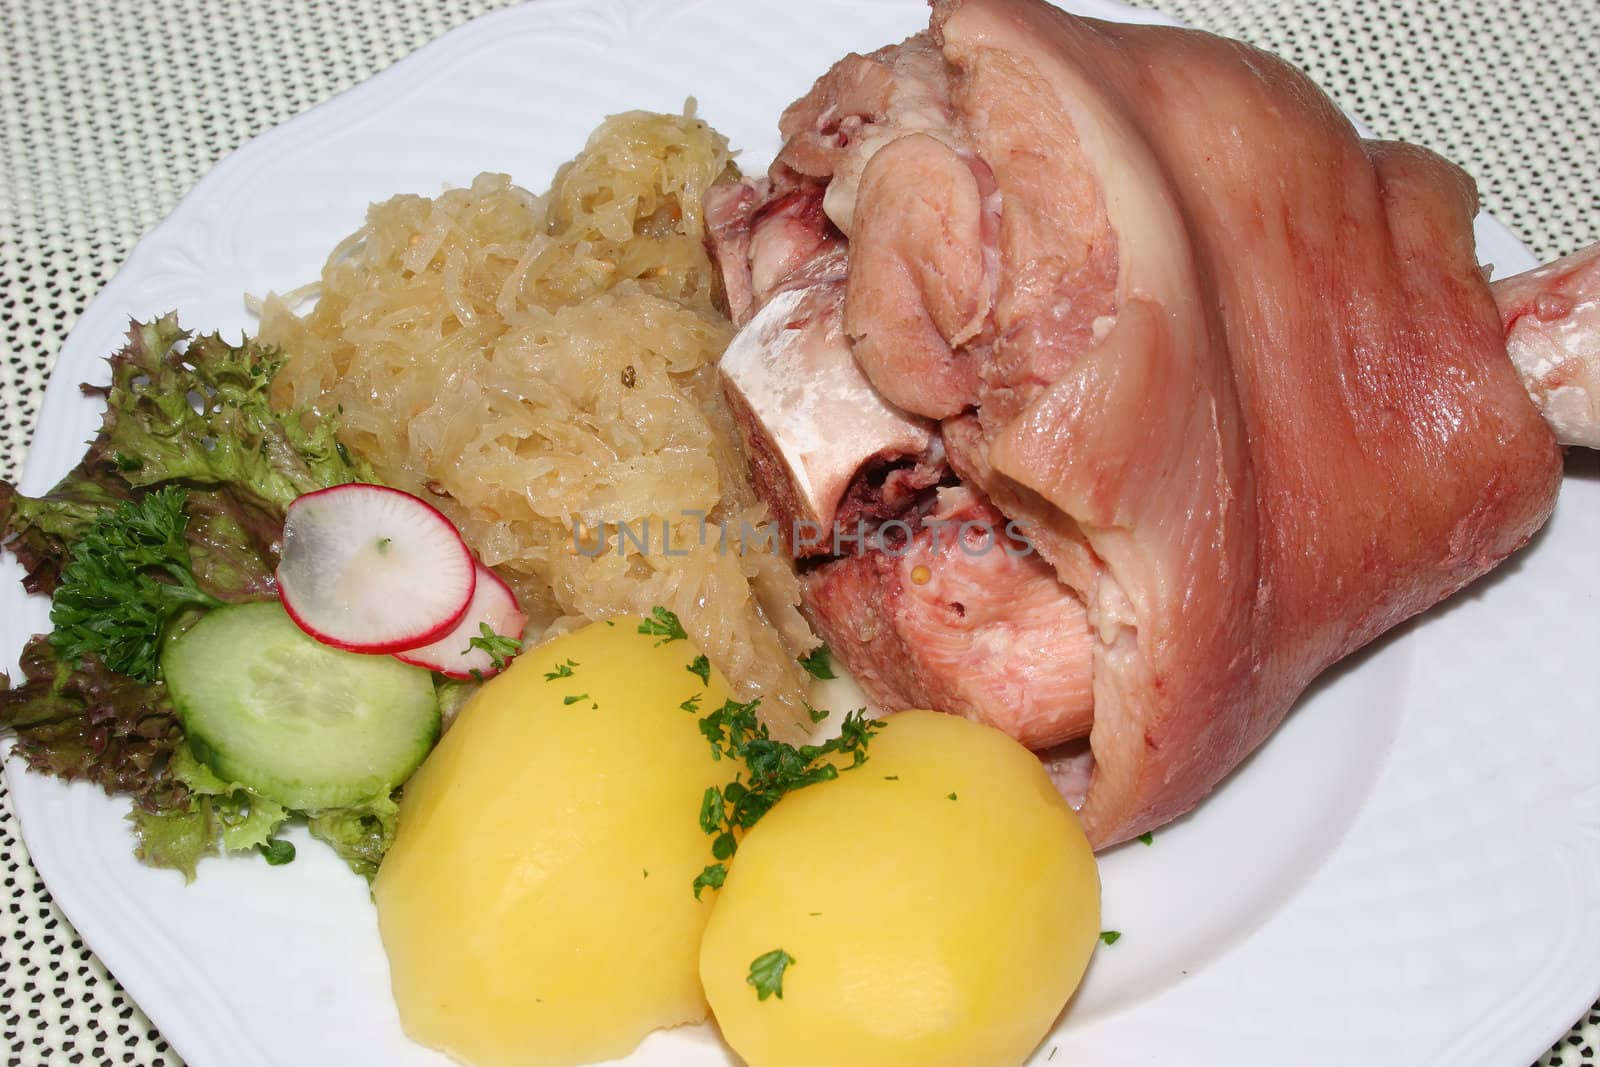 Pork with cabbage, potatoes  and salad